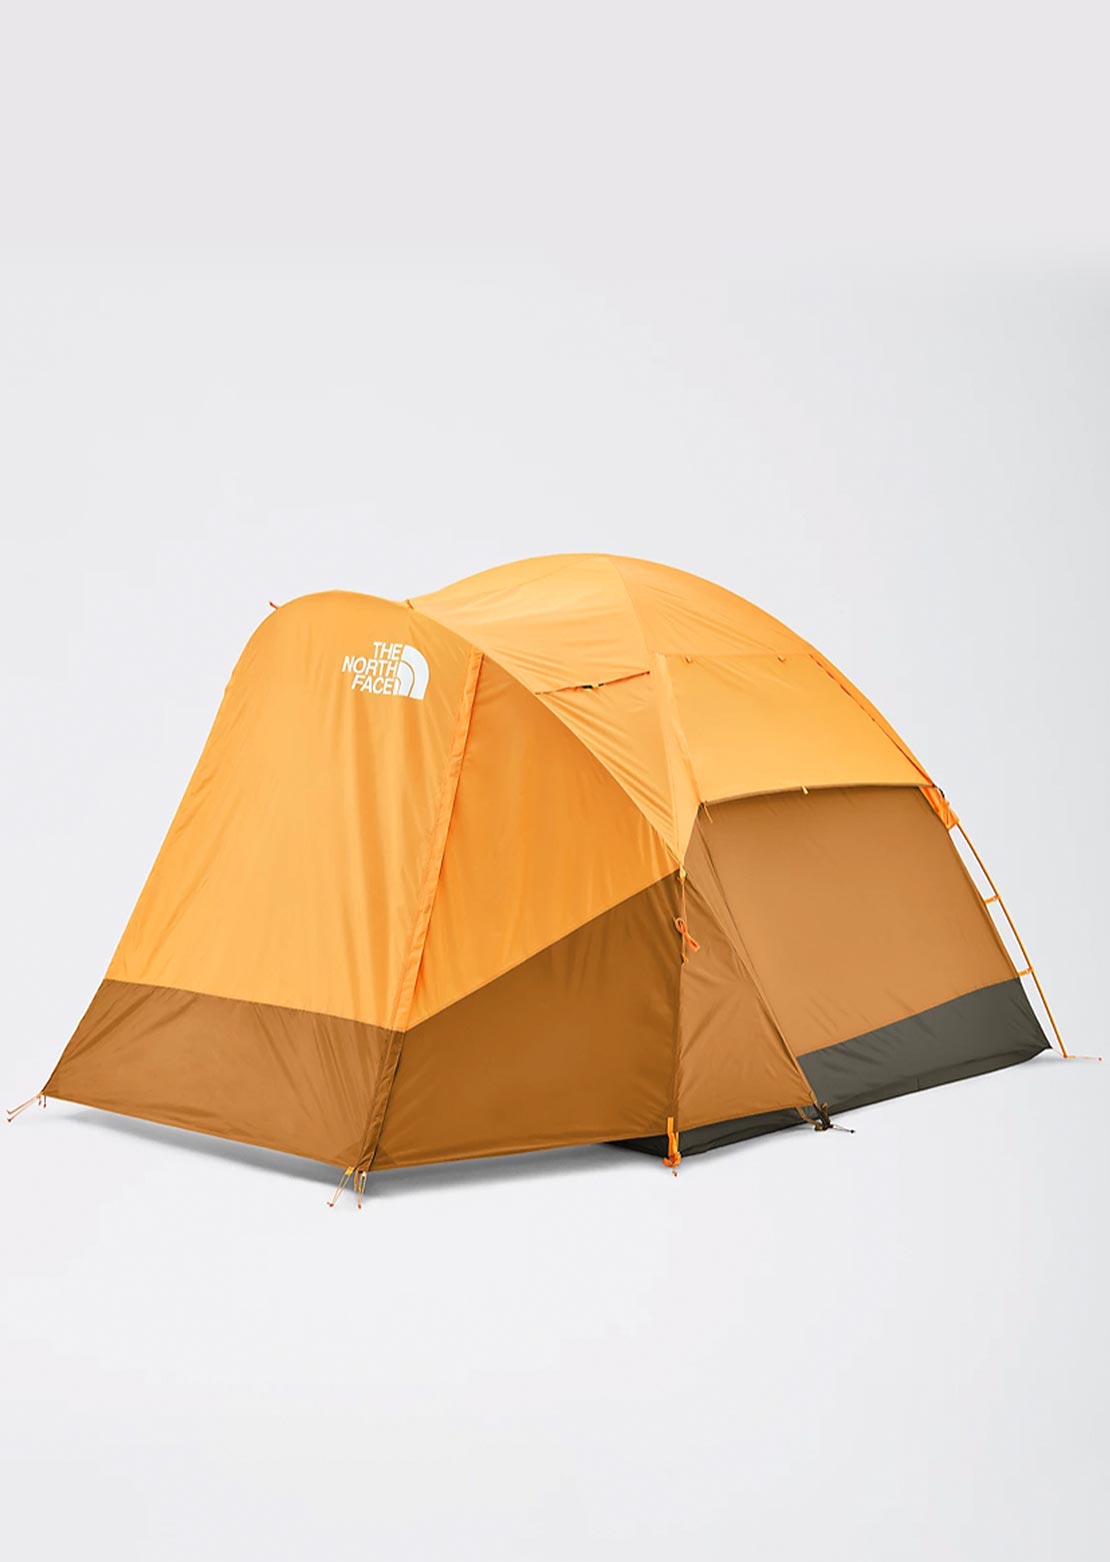 The North Face Wawona 4-Person Tent Light Exuberance Orange/Timber Tan/New Taupe Green